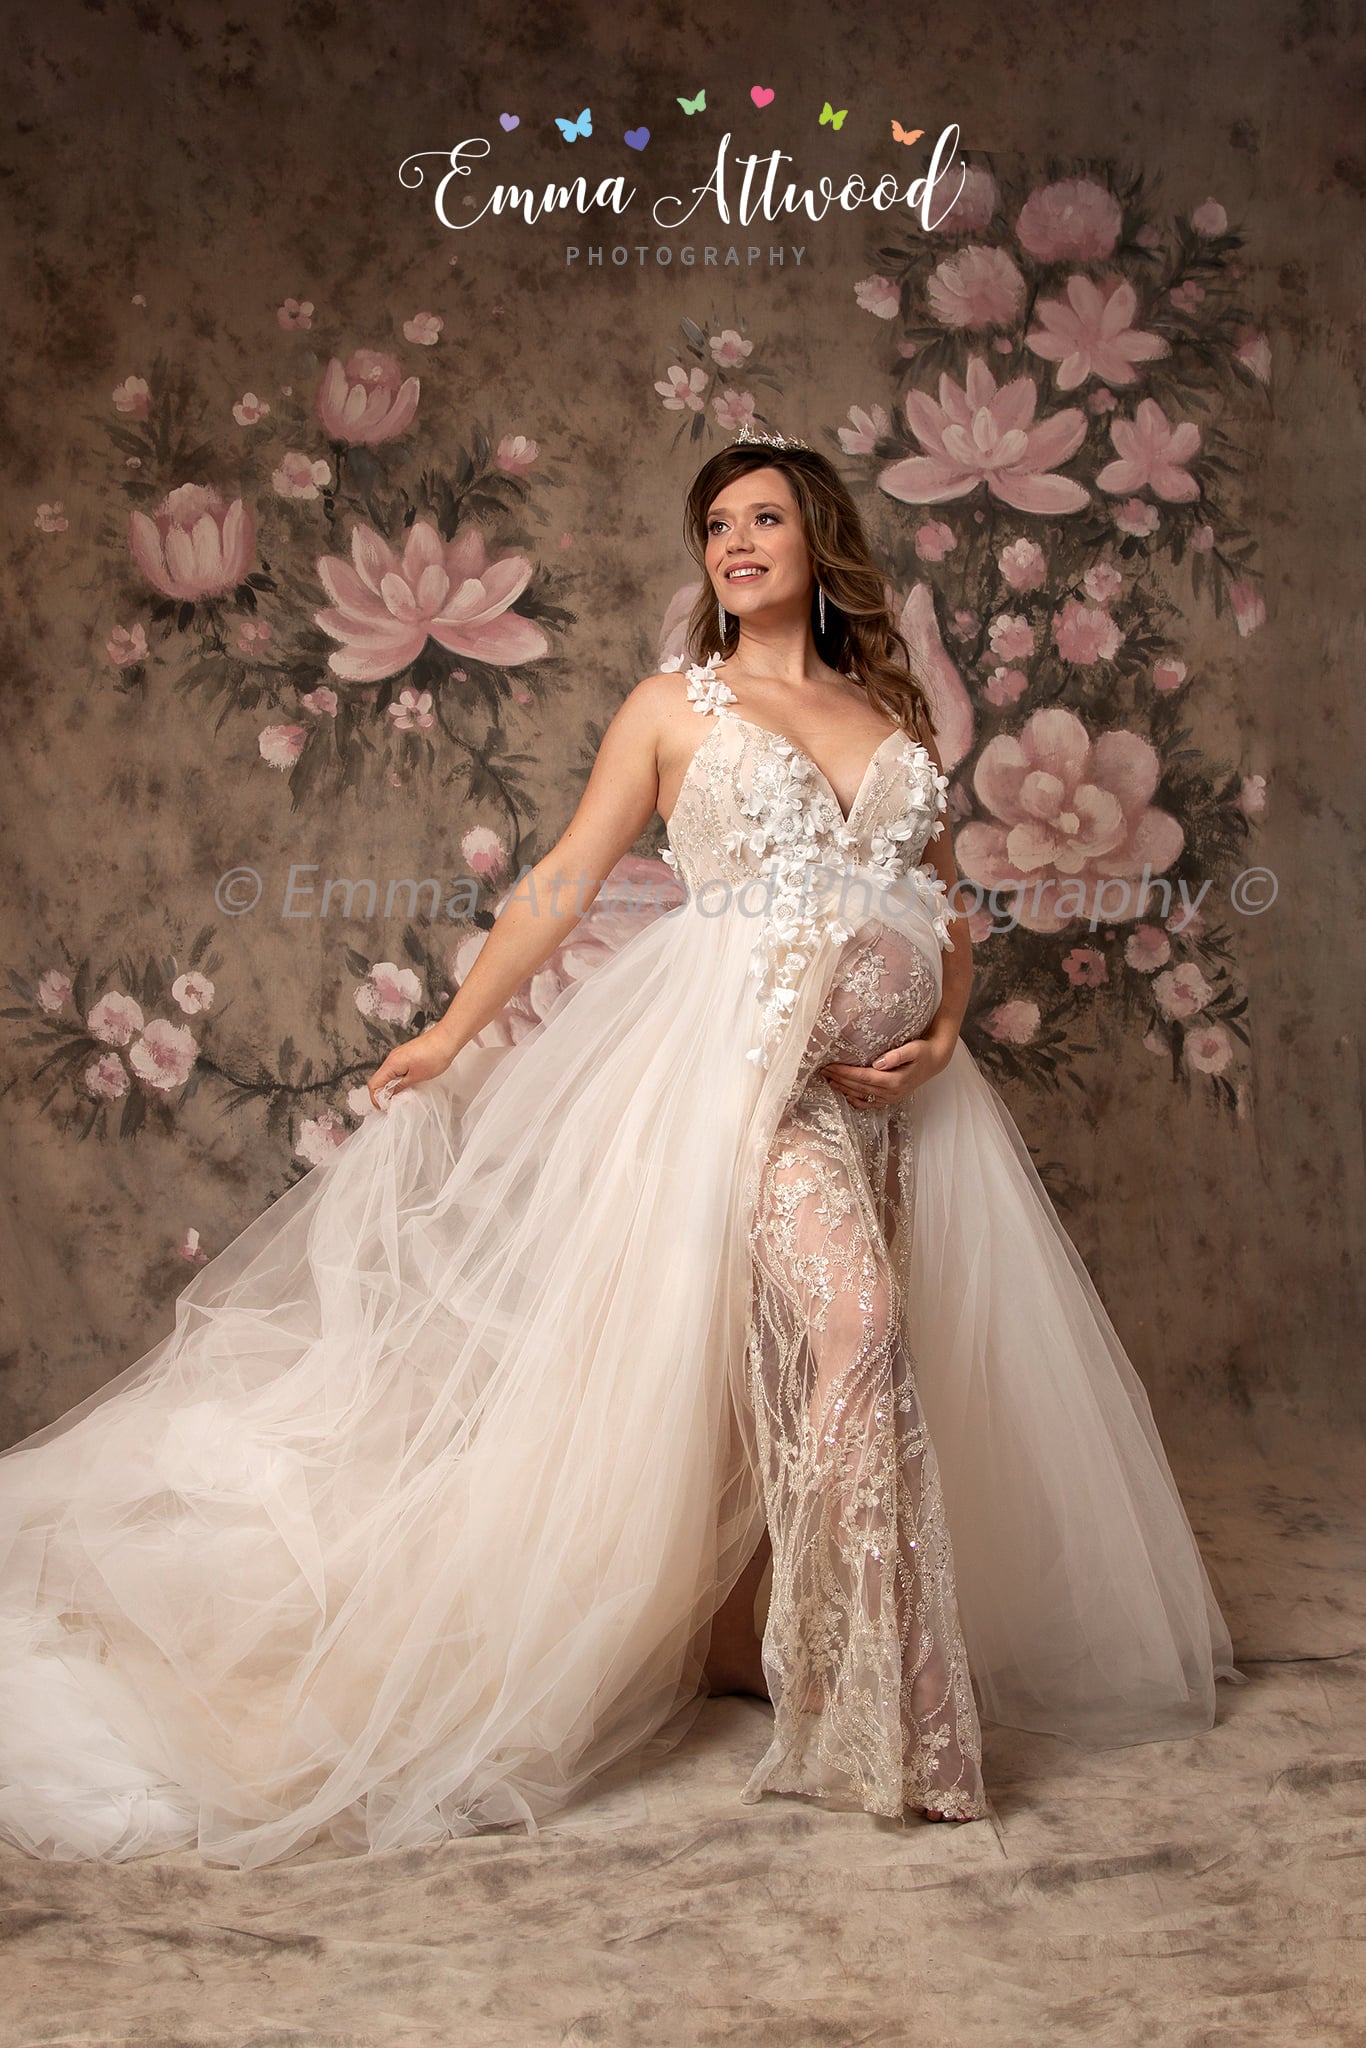 Champagne Run Away With Me Gown - maternity photoshoot dress